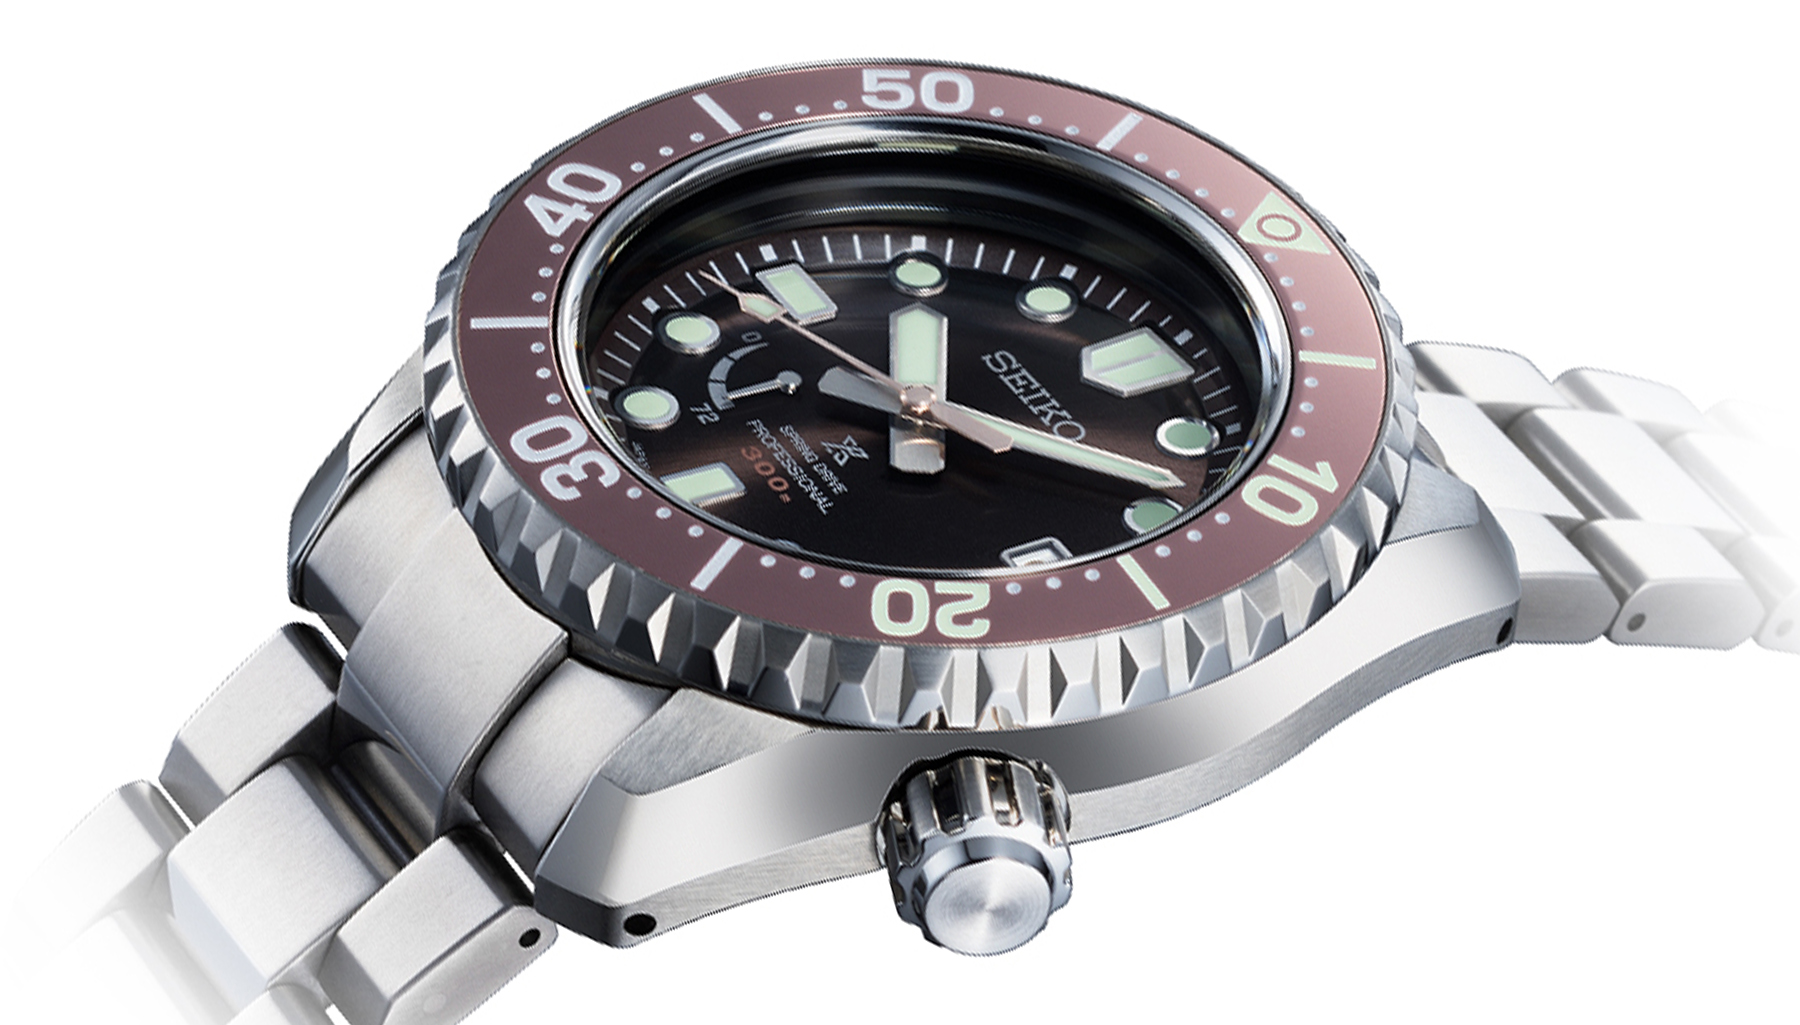 Seiko Spring Drive Movements - All You Need To Know